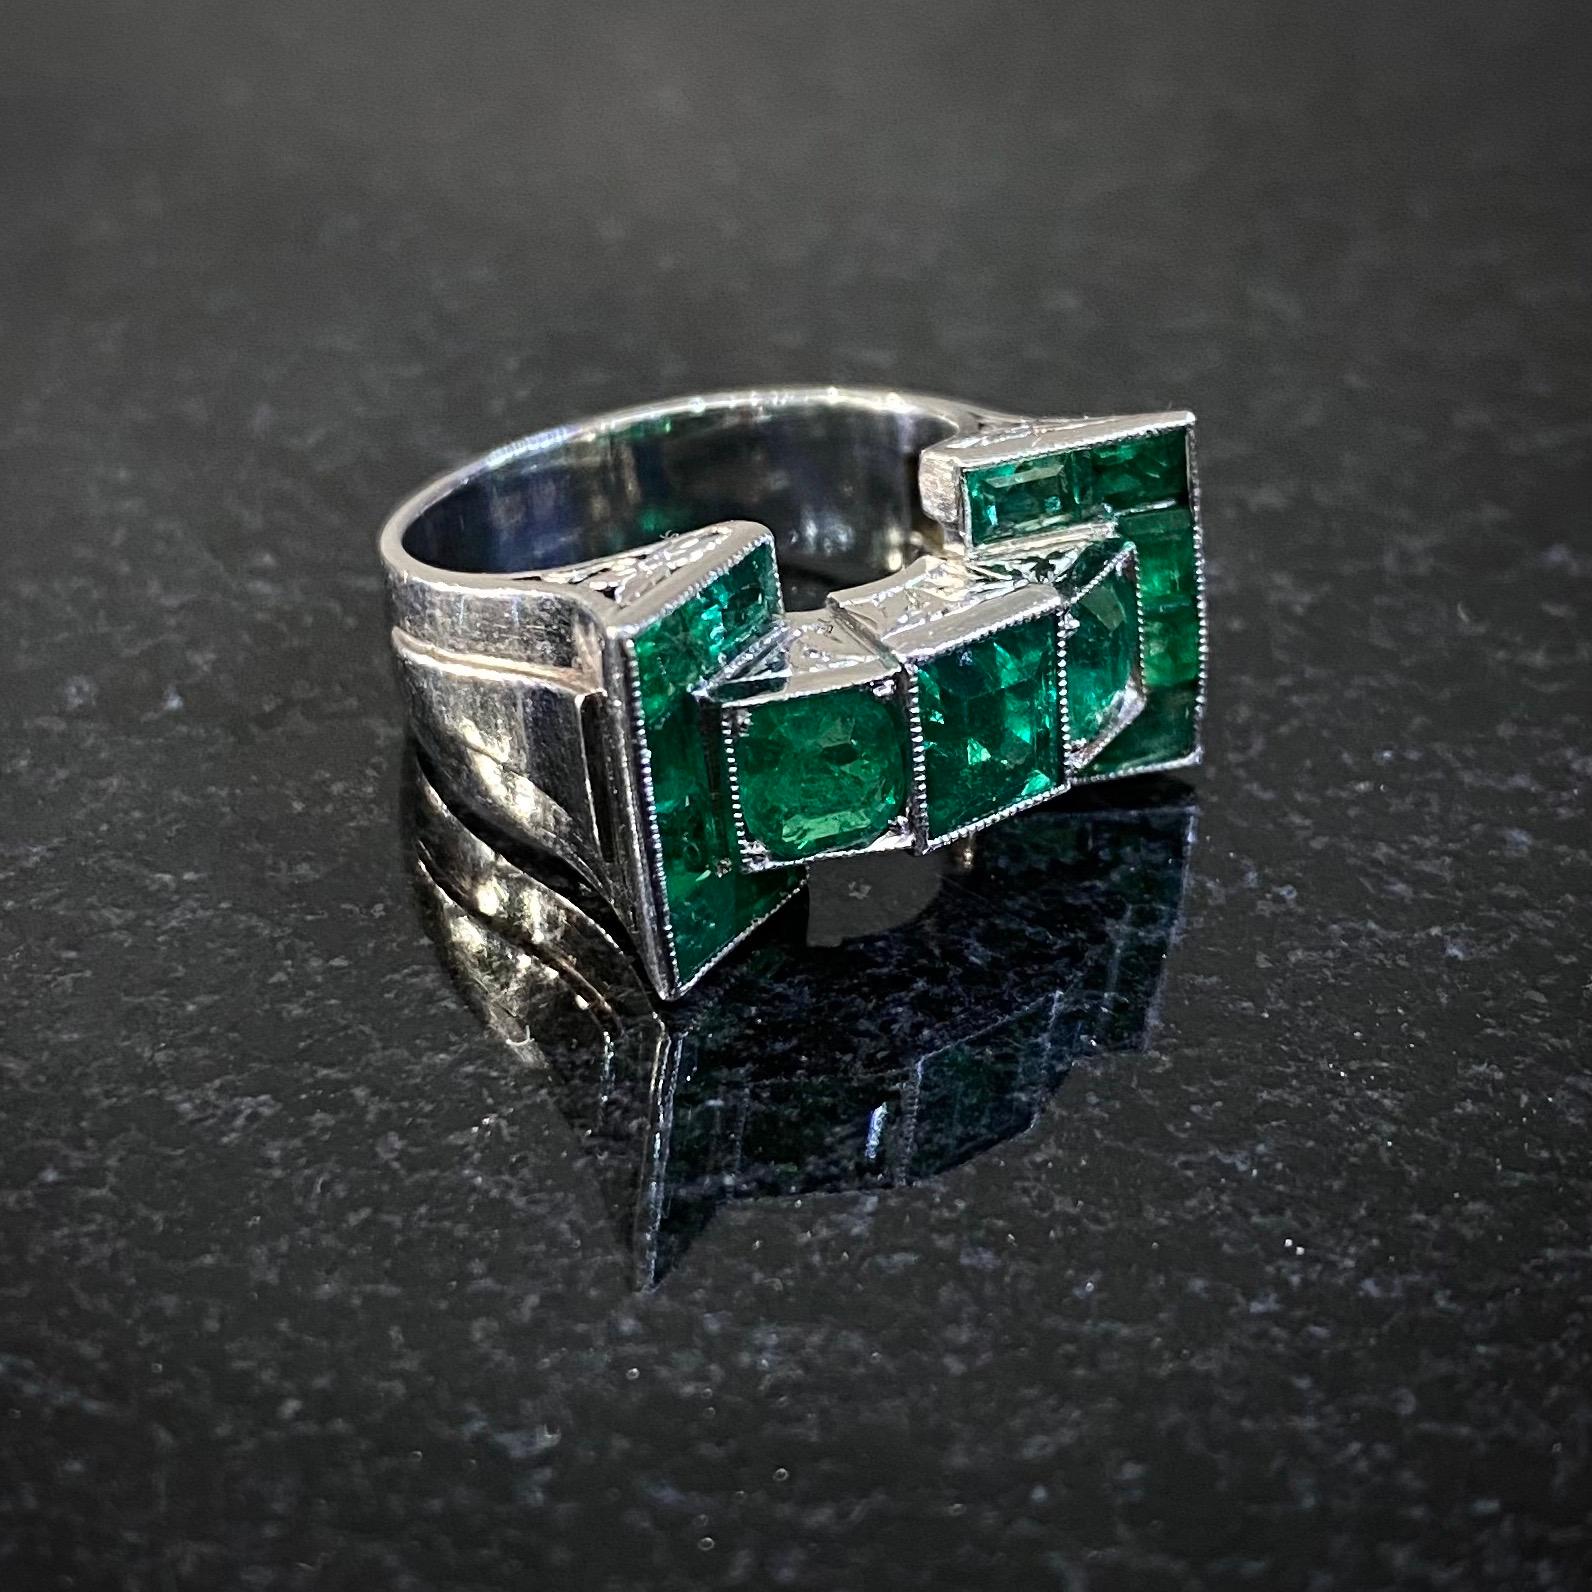 Leitão & Irmão Art Deco Colombian emerald geometric Odeonesque cocktail ring in platinum, Portugal, circa 1930, in original maker’s case. This treasure by the Portuguese crown jeweler features 15 vivid green emeralds in open-back millegrain